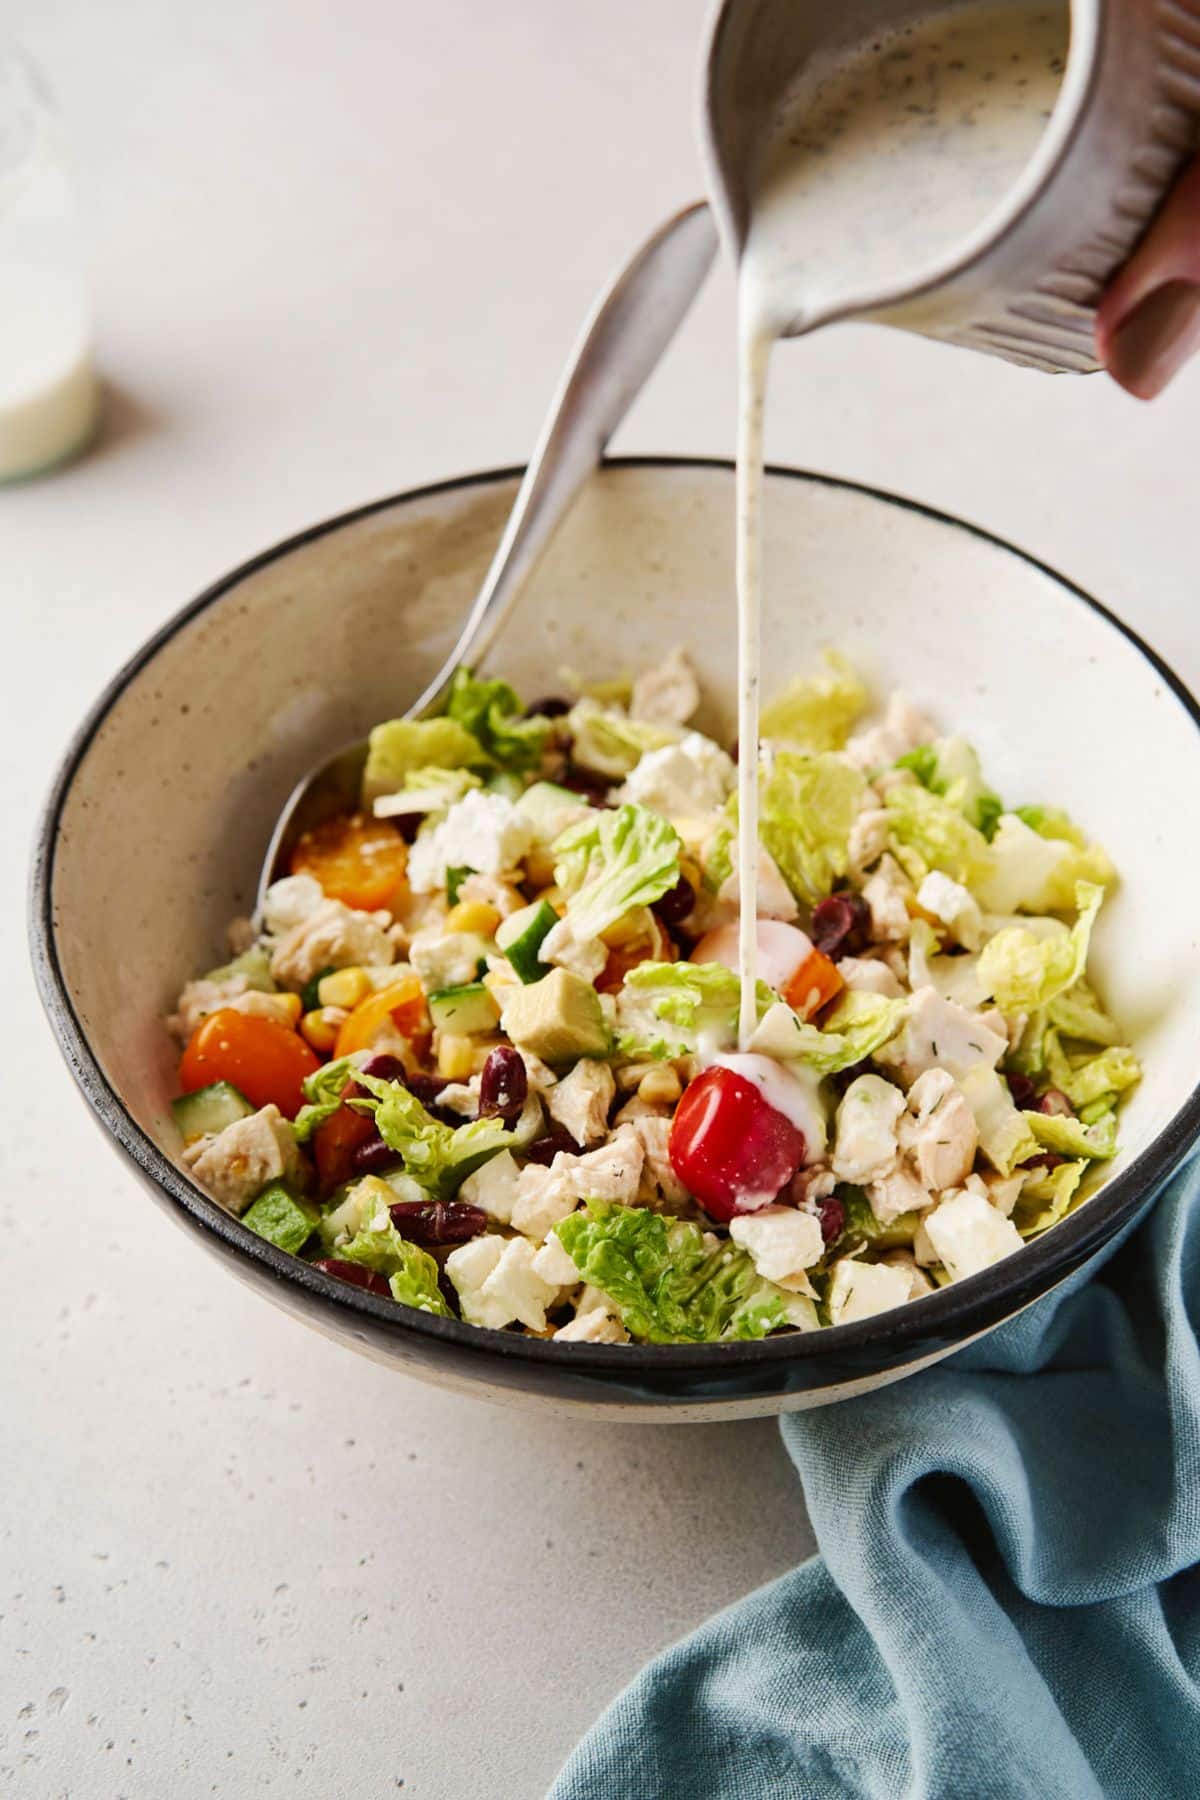 Pouring ranch dressing over a salad made with lettuce, tomatoes and chicken.